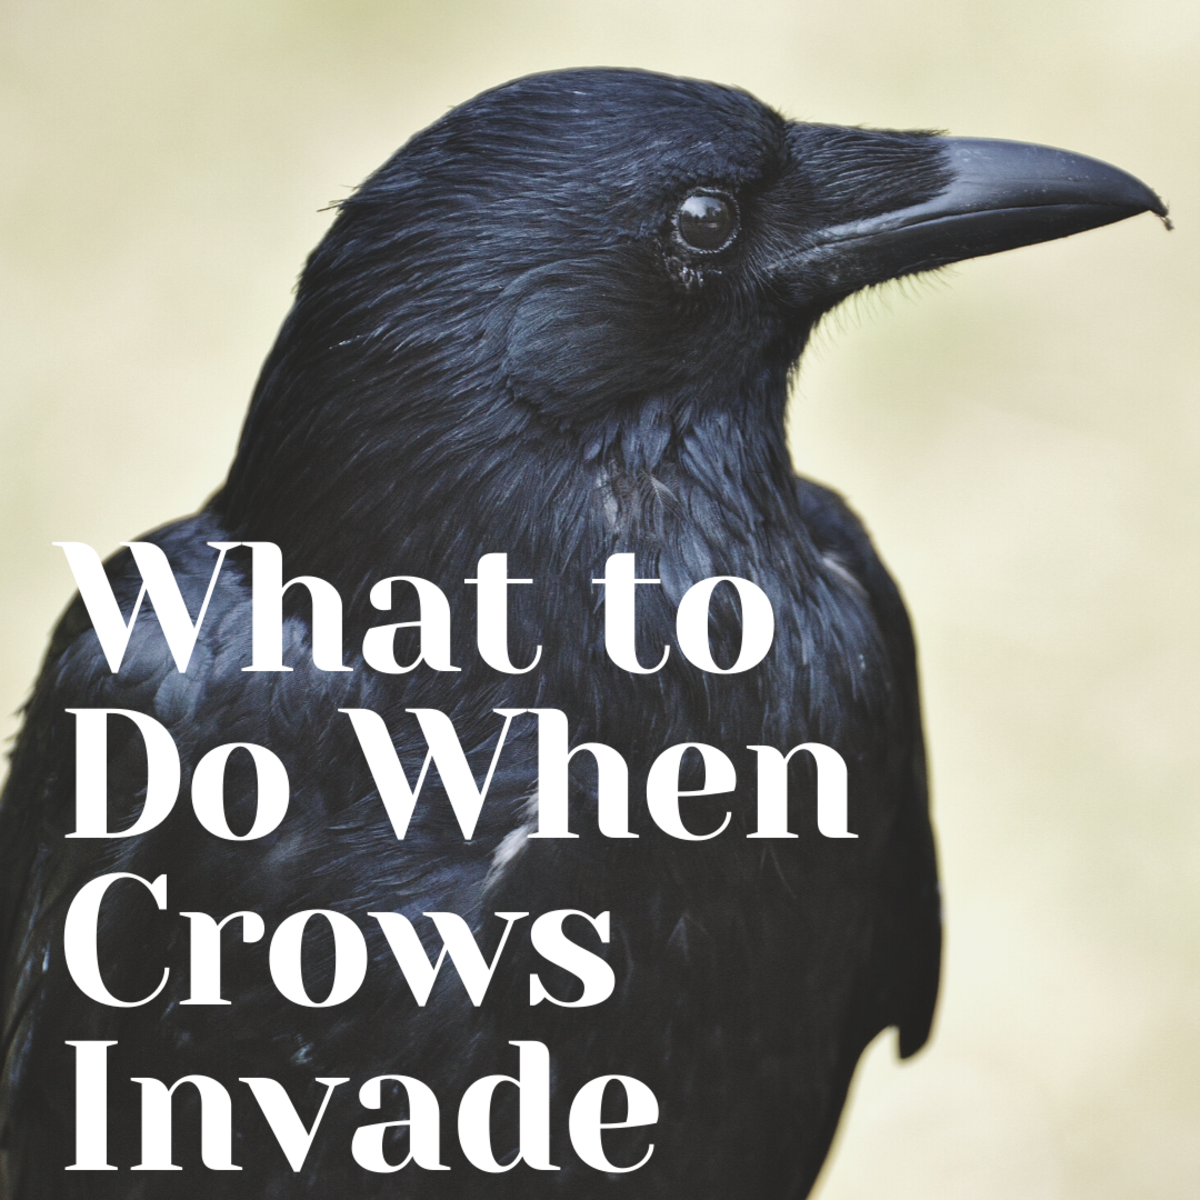 My methods for getting rid of crows in my backyard